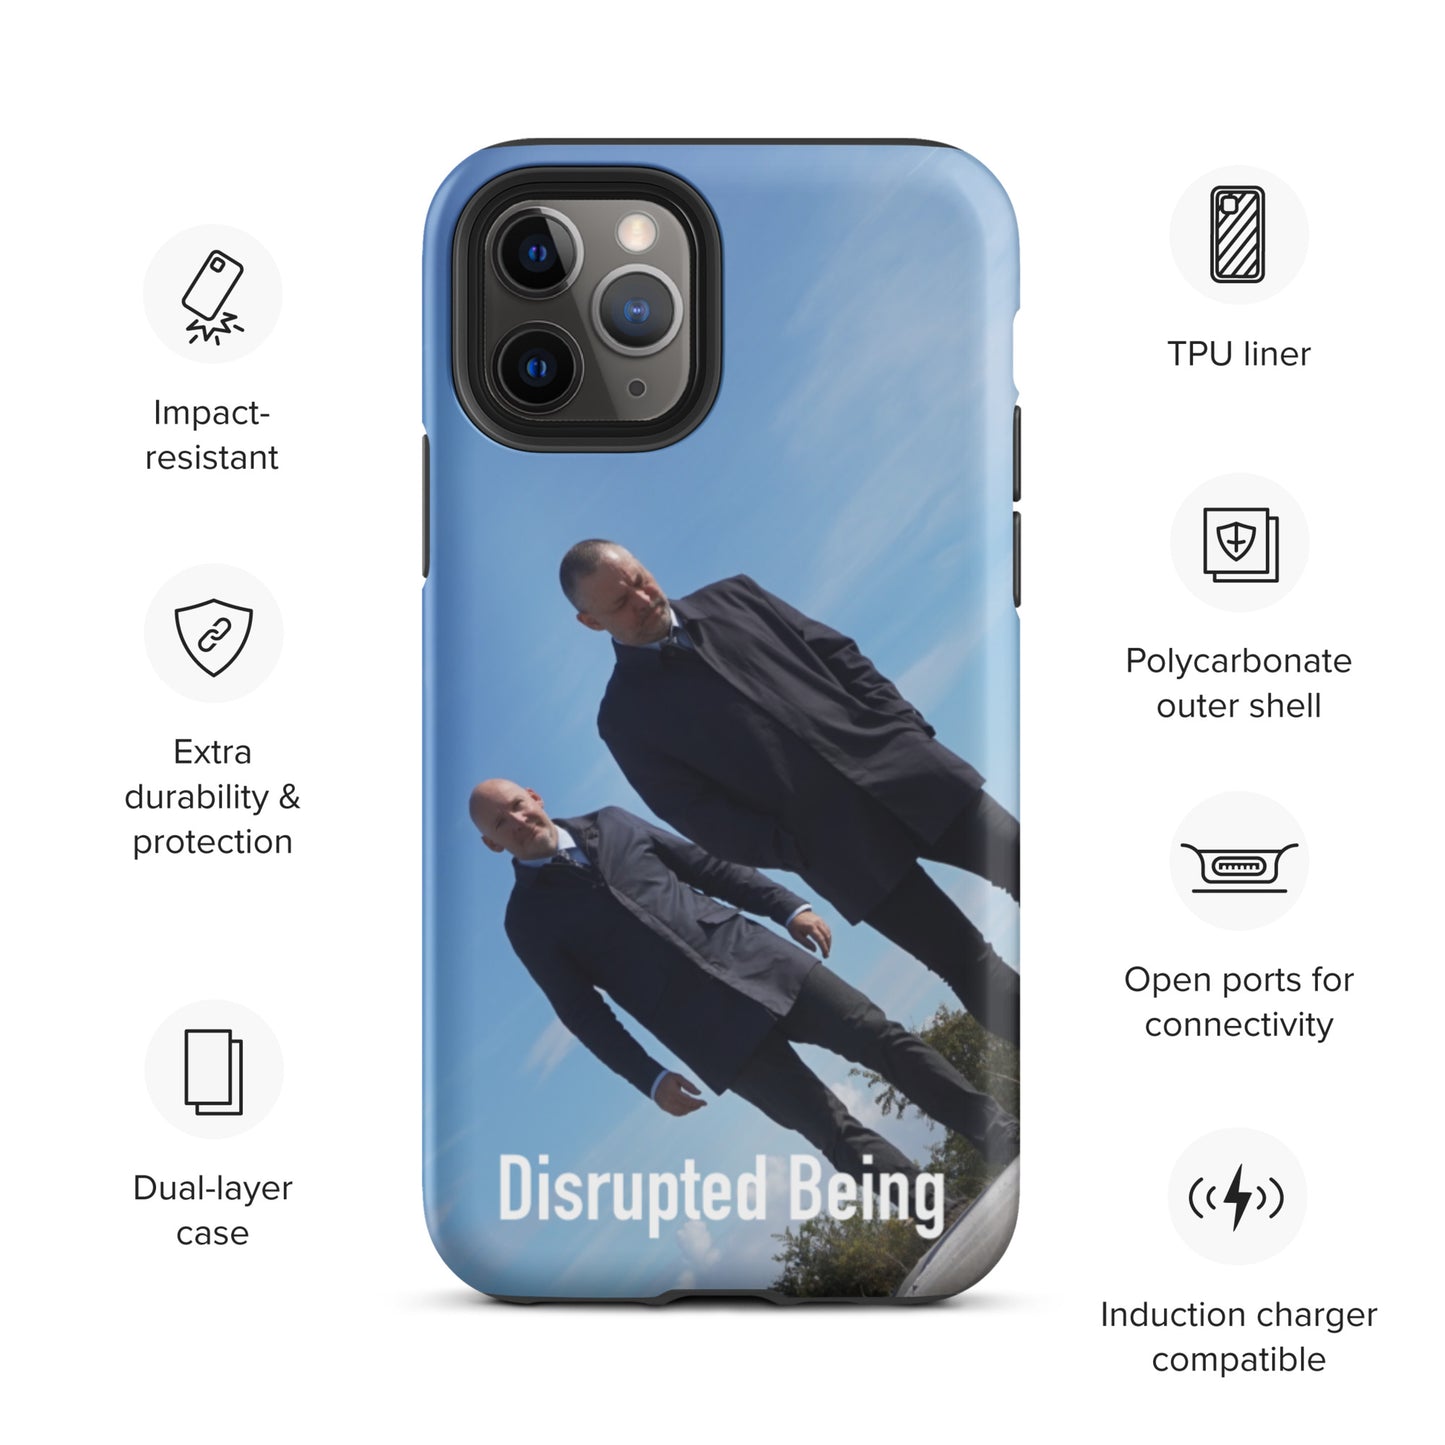 Disrupted Being, official photo and logo, Tough iPhone case